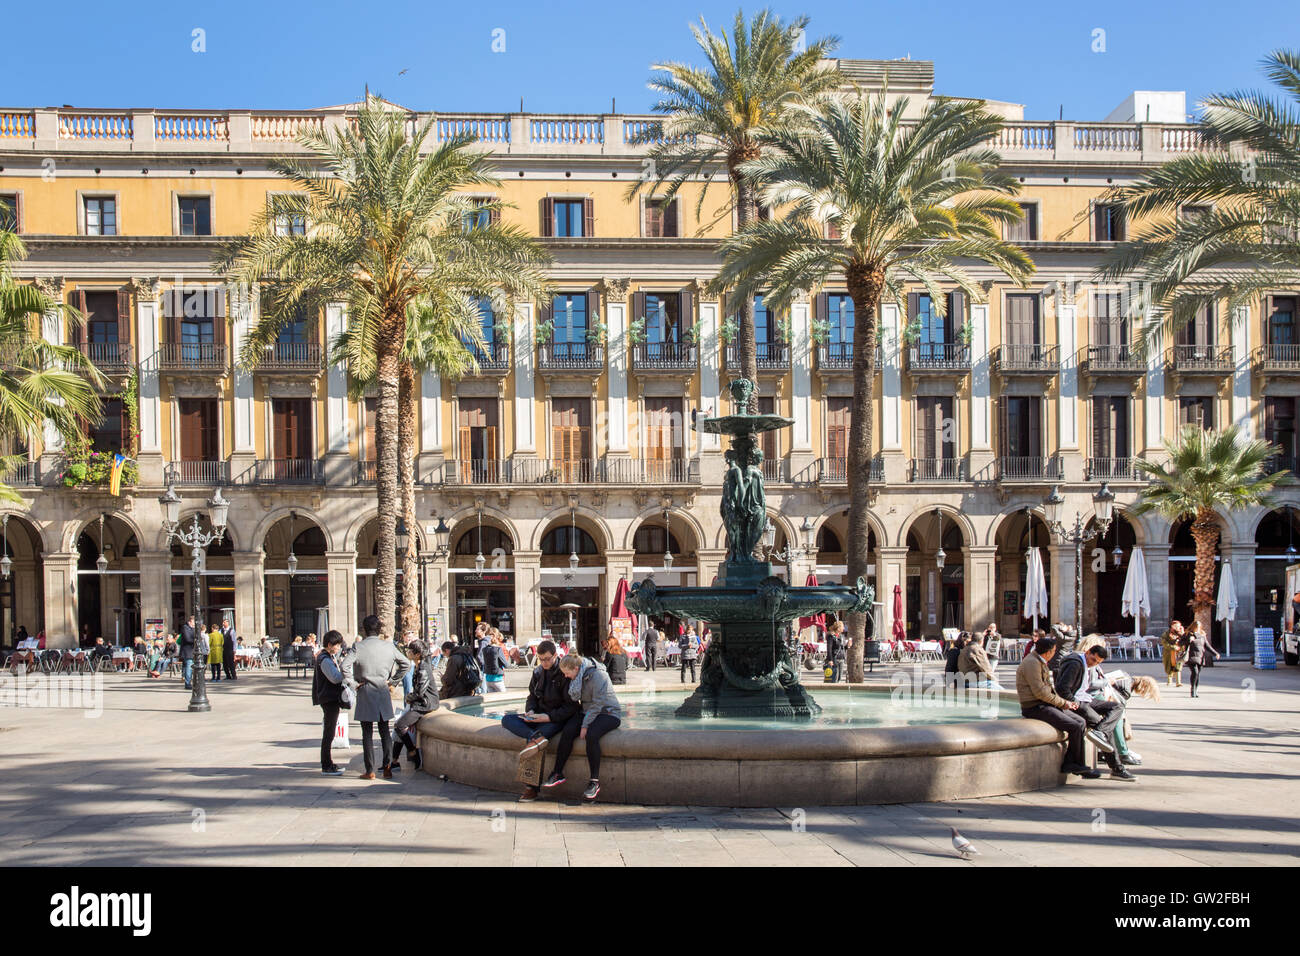 Placa Reial, (The Royal Plaza) in Barcelona, Spain. Stock Photo